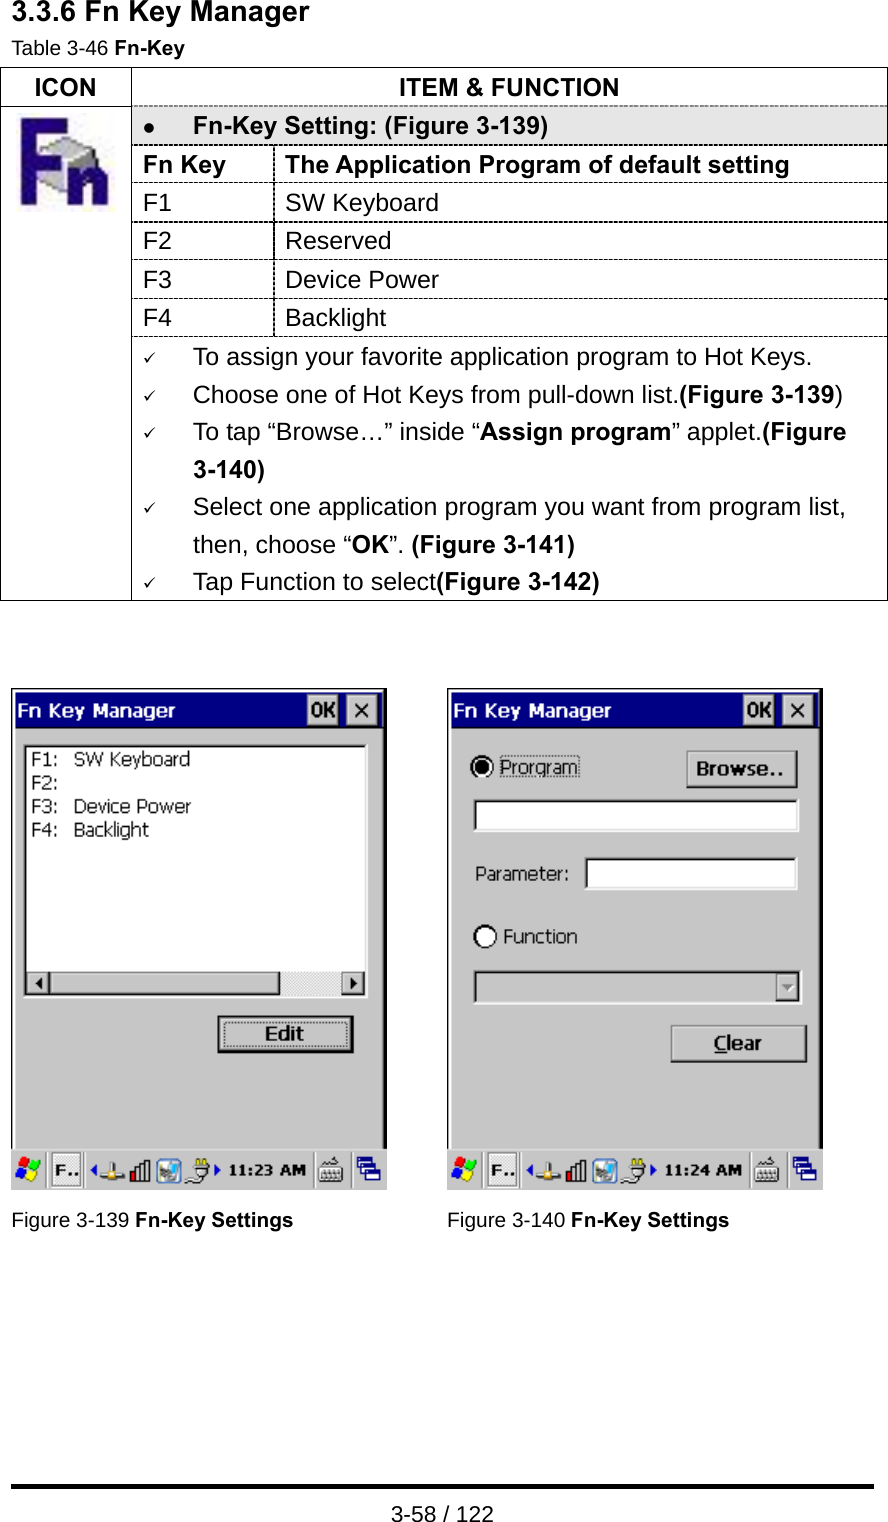  3-58 / 122 3.3.6 Fn Key Manager Table 3-46 Fn-Key ICON  ITEM &amp; FUNCTION z Fn-Key Setting: (Figure 3-139) Fn Key  The Application Program of default setting F1 SW Keyboard F2 Reserved F3 Device Power F4 Backlight  9 To assign your favorite application program to Hot Keys. 9 Choose one of Hot Keys from pull-down list.(Figure 3-139) 9 To tap “Browse…” inside “Assign program” applet.(Figure 3-140) 9 Select one application program you want from program list, then, choose “OK”. (Figure 3-141) 9 Tap Function to select(Figure 3-142)      Figure 3-139 Fn-Key Settings Figure 3-140 Fn-Key Settings   